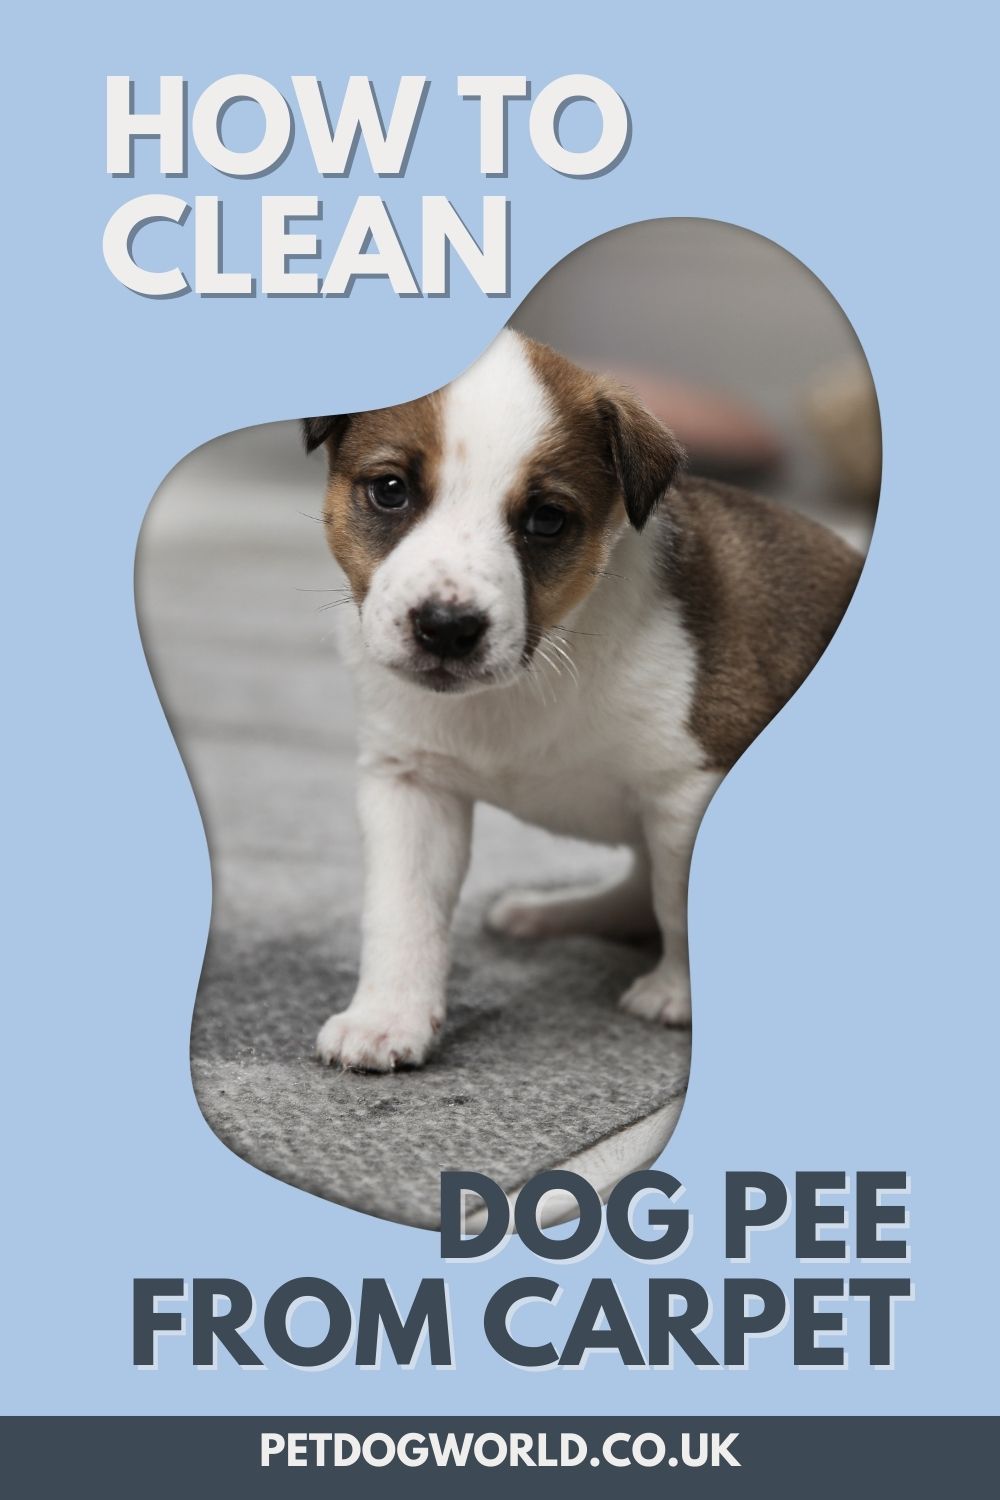 Cleaning up dog pee from a carpet can be a bit challenging, but with the right tools and techniques, you can effectively remove the stain and odour.